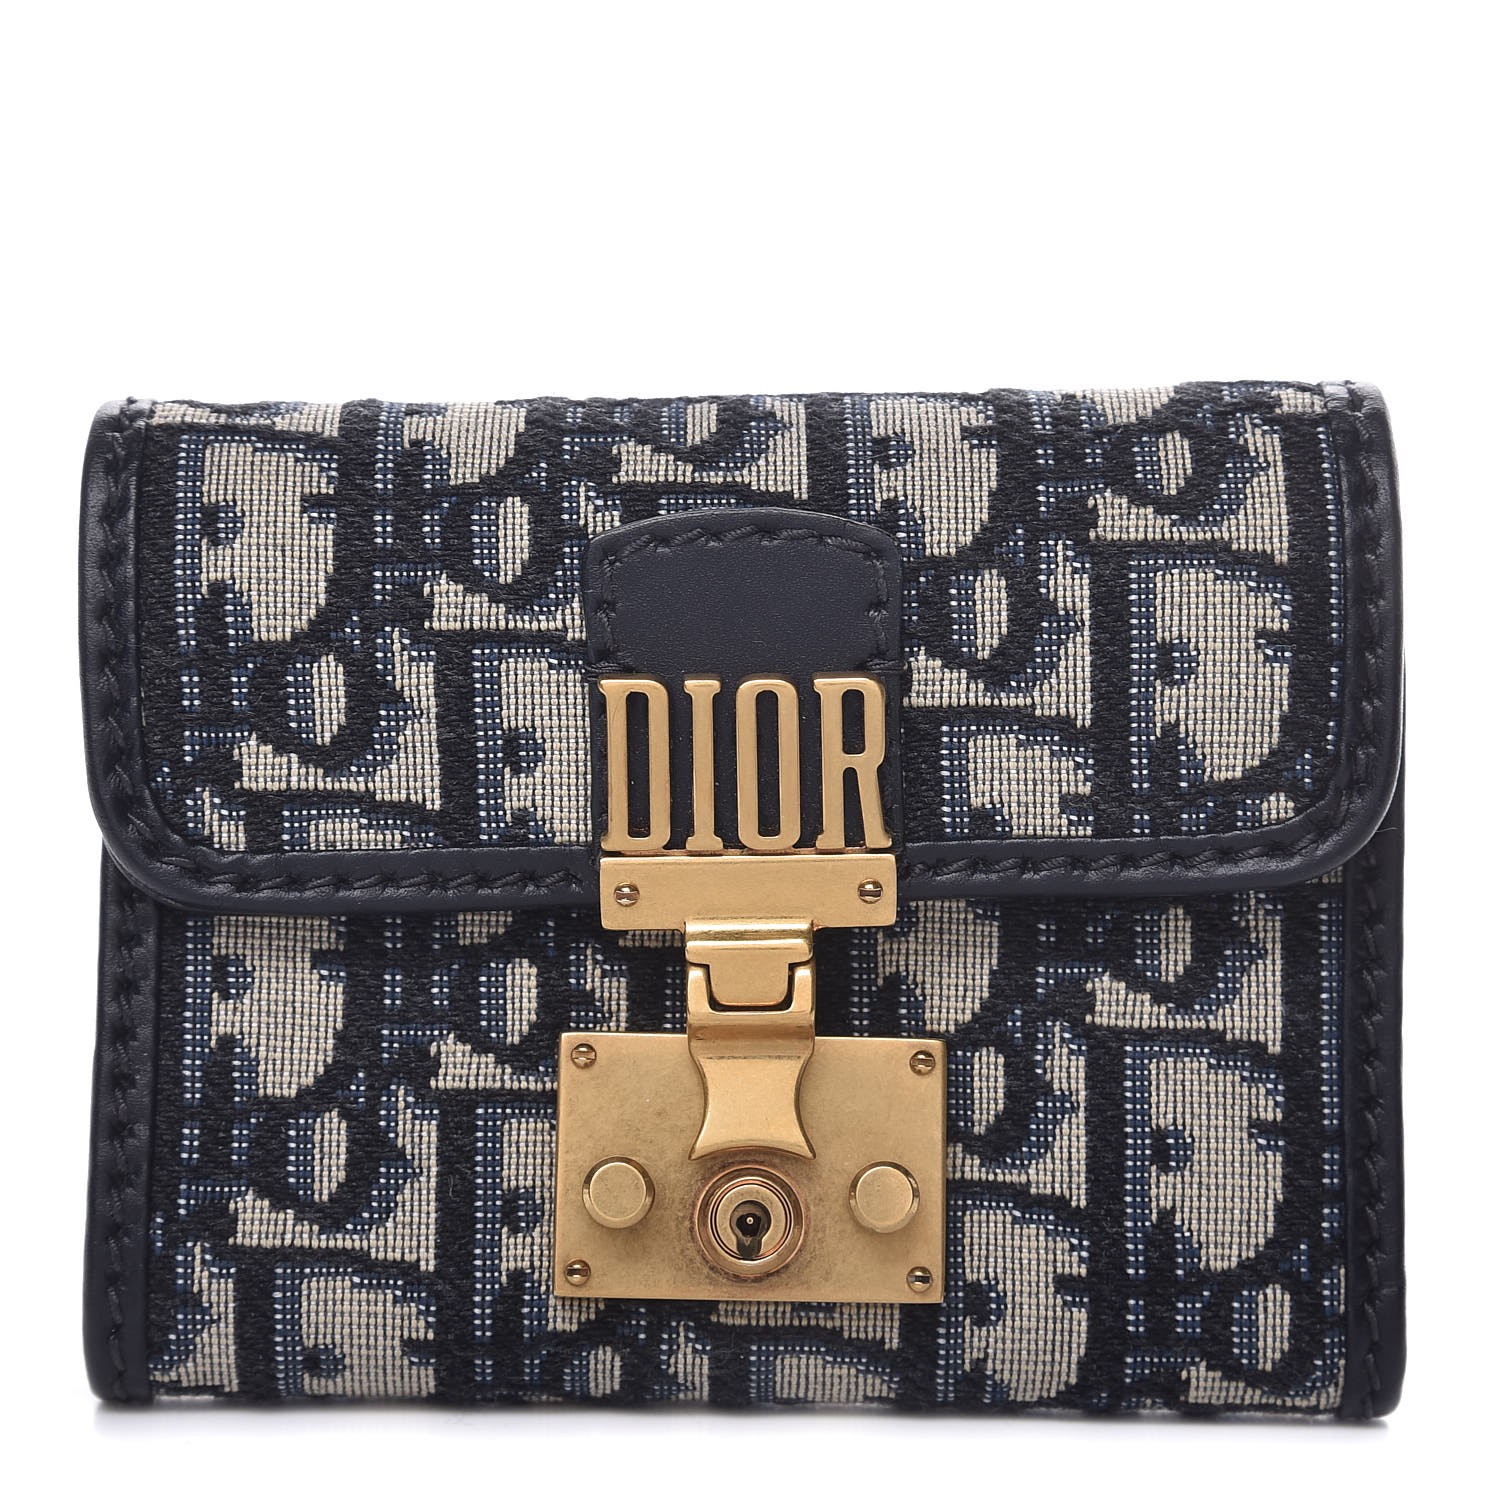 dior addict oblique > Up to 64% OFF > Free shipping